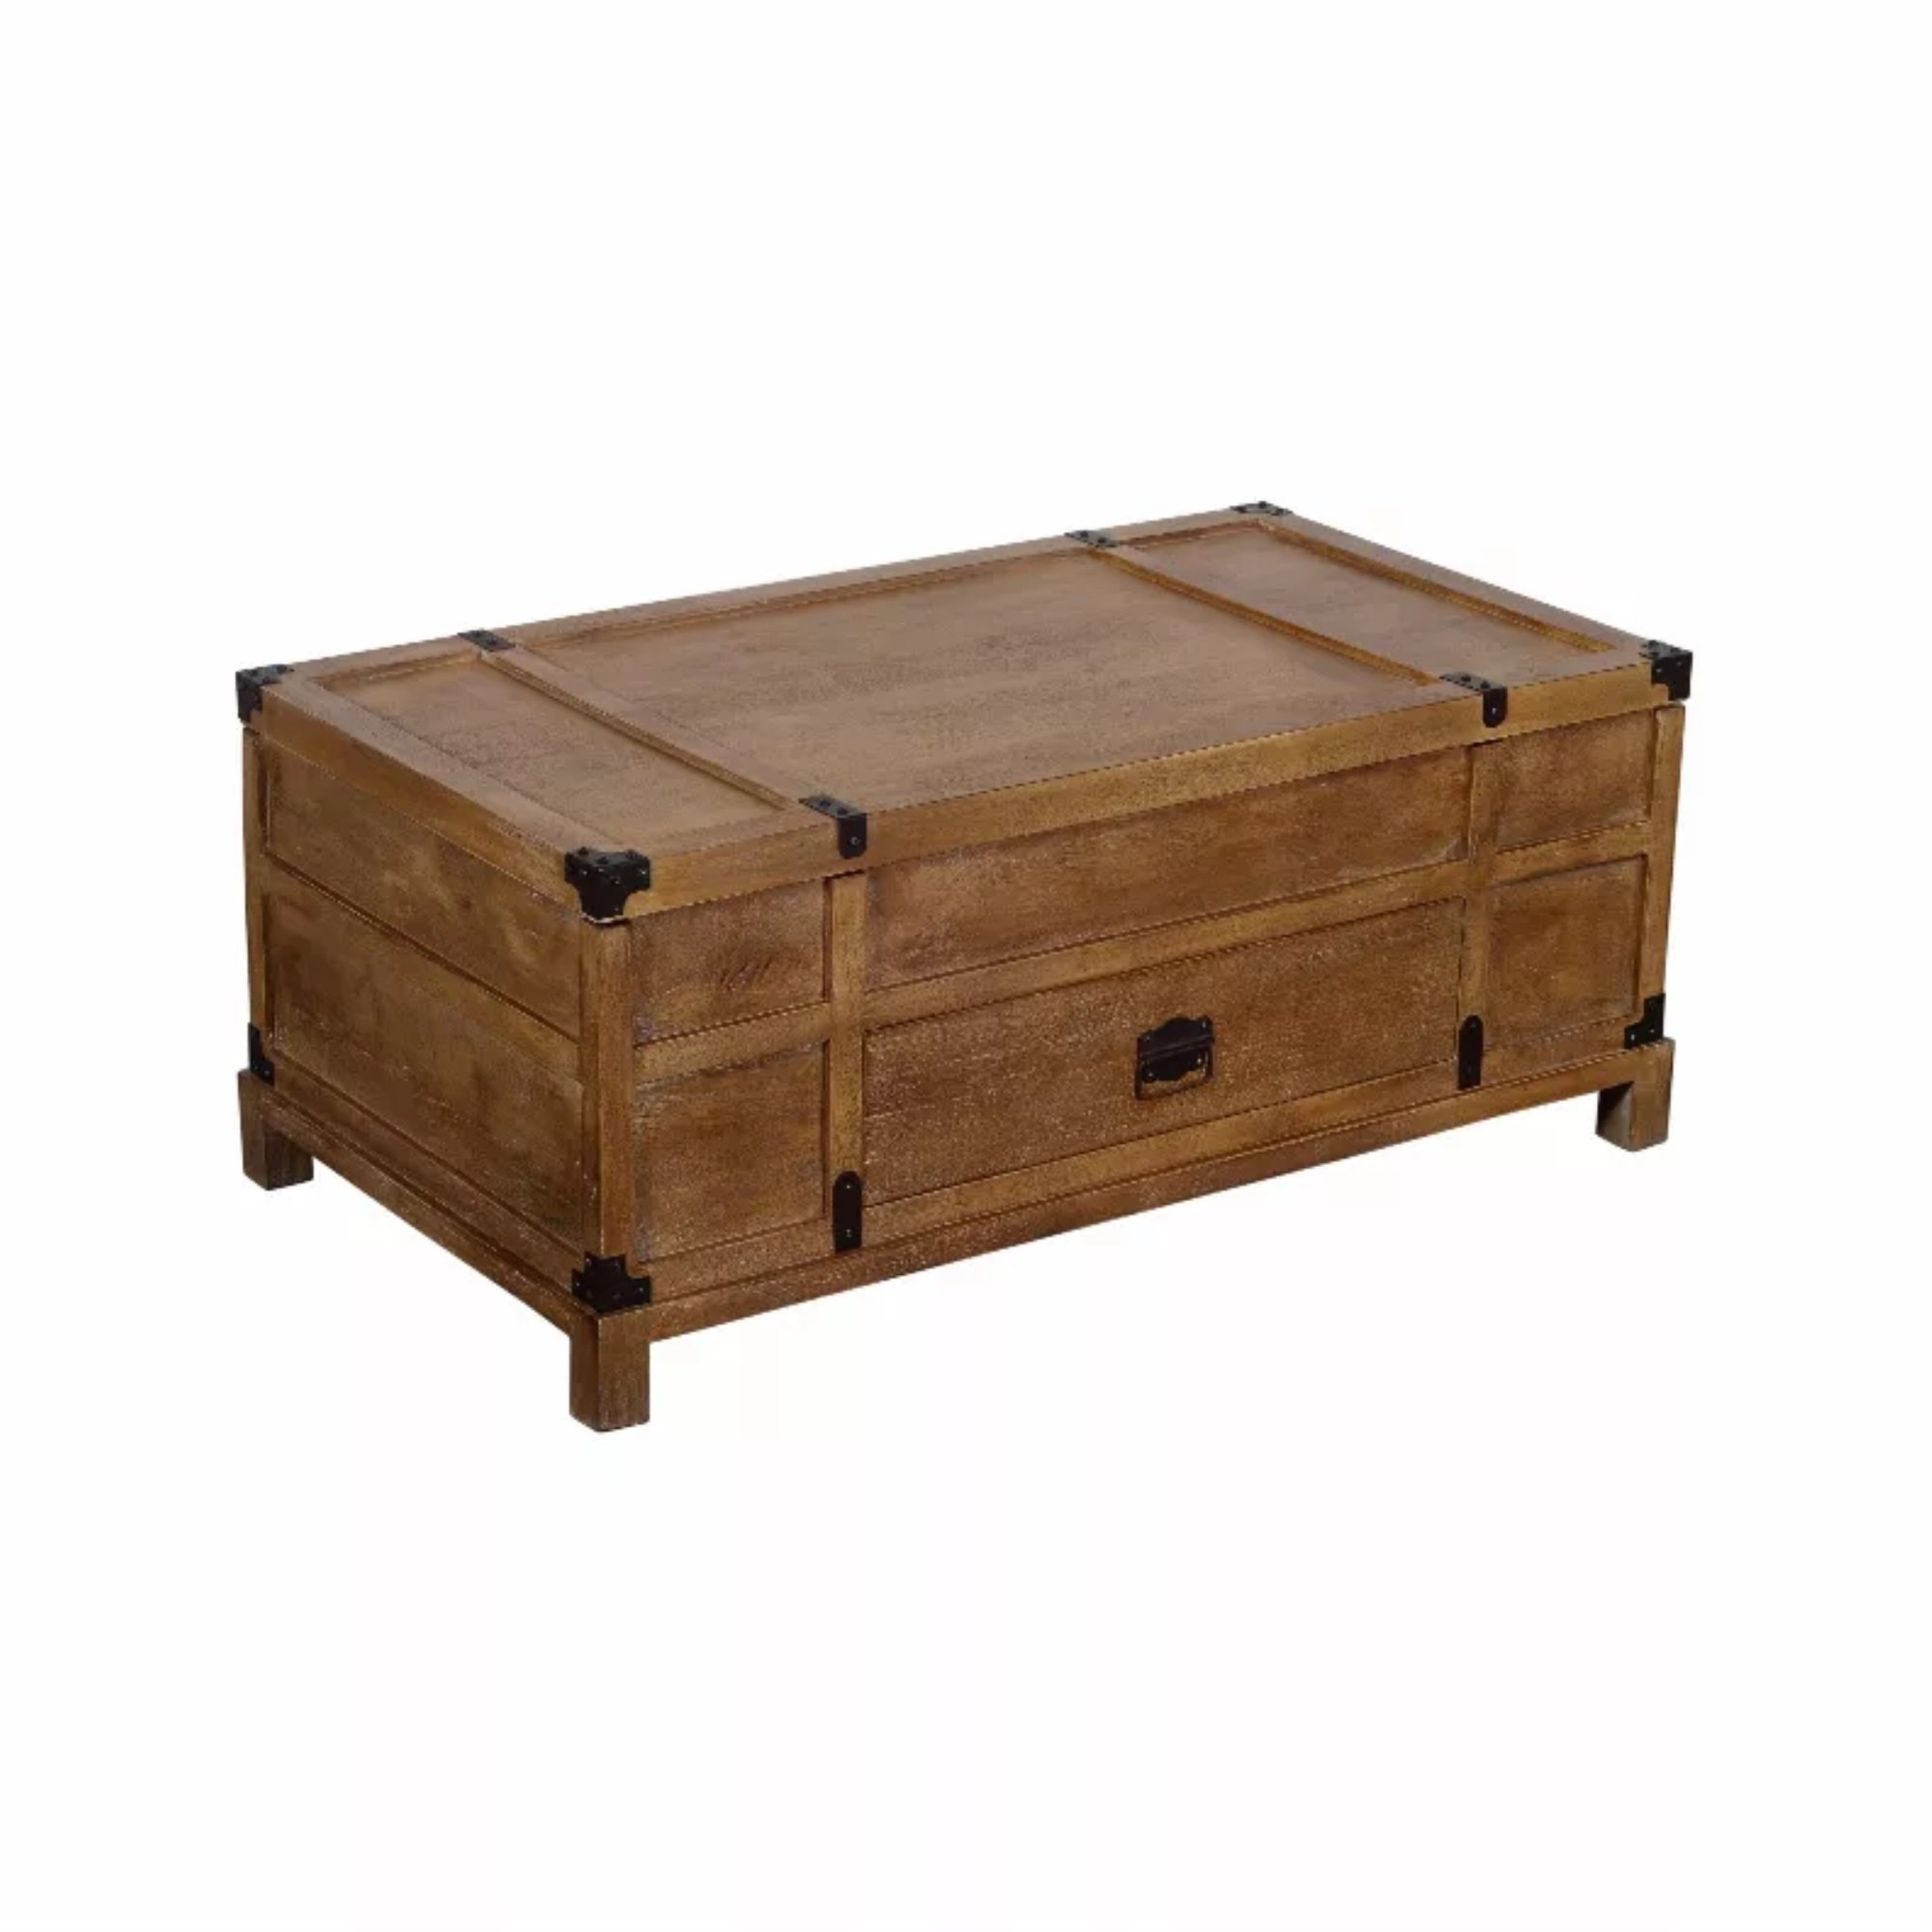 Rustic Single Drawer Mango Wood Coffee Table with Lift Top Storage &amp; Compartments, Brown